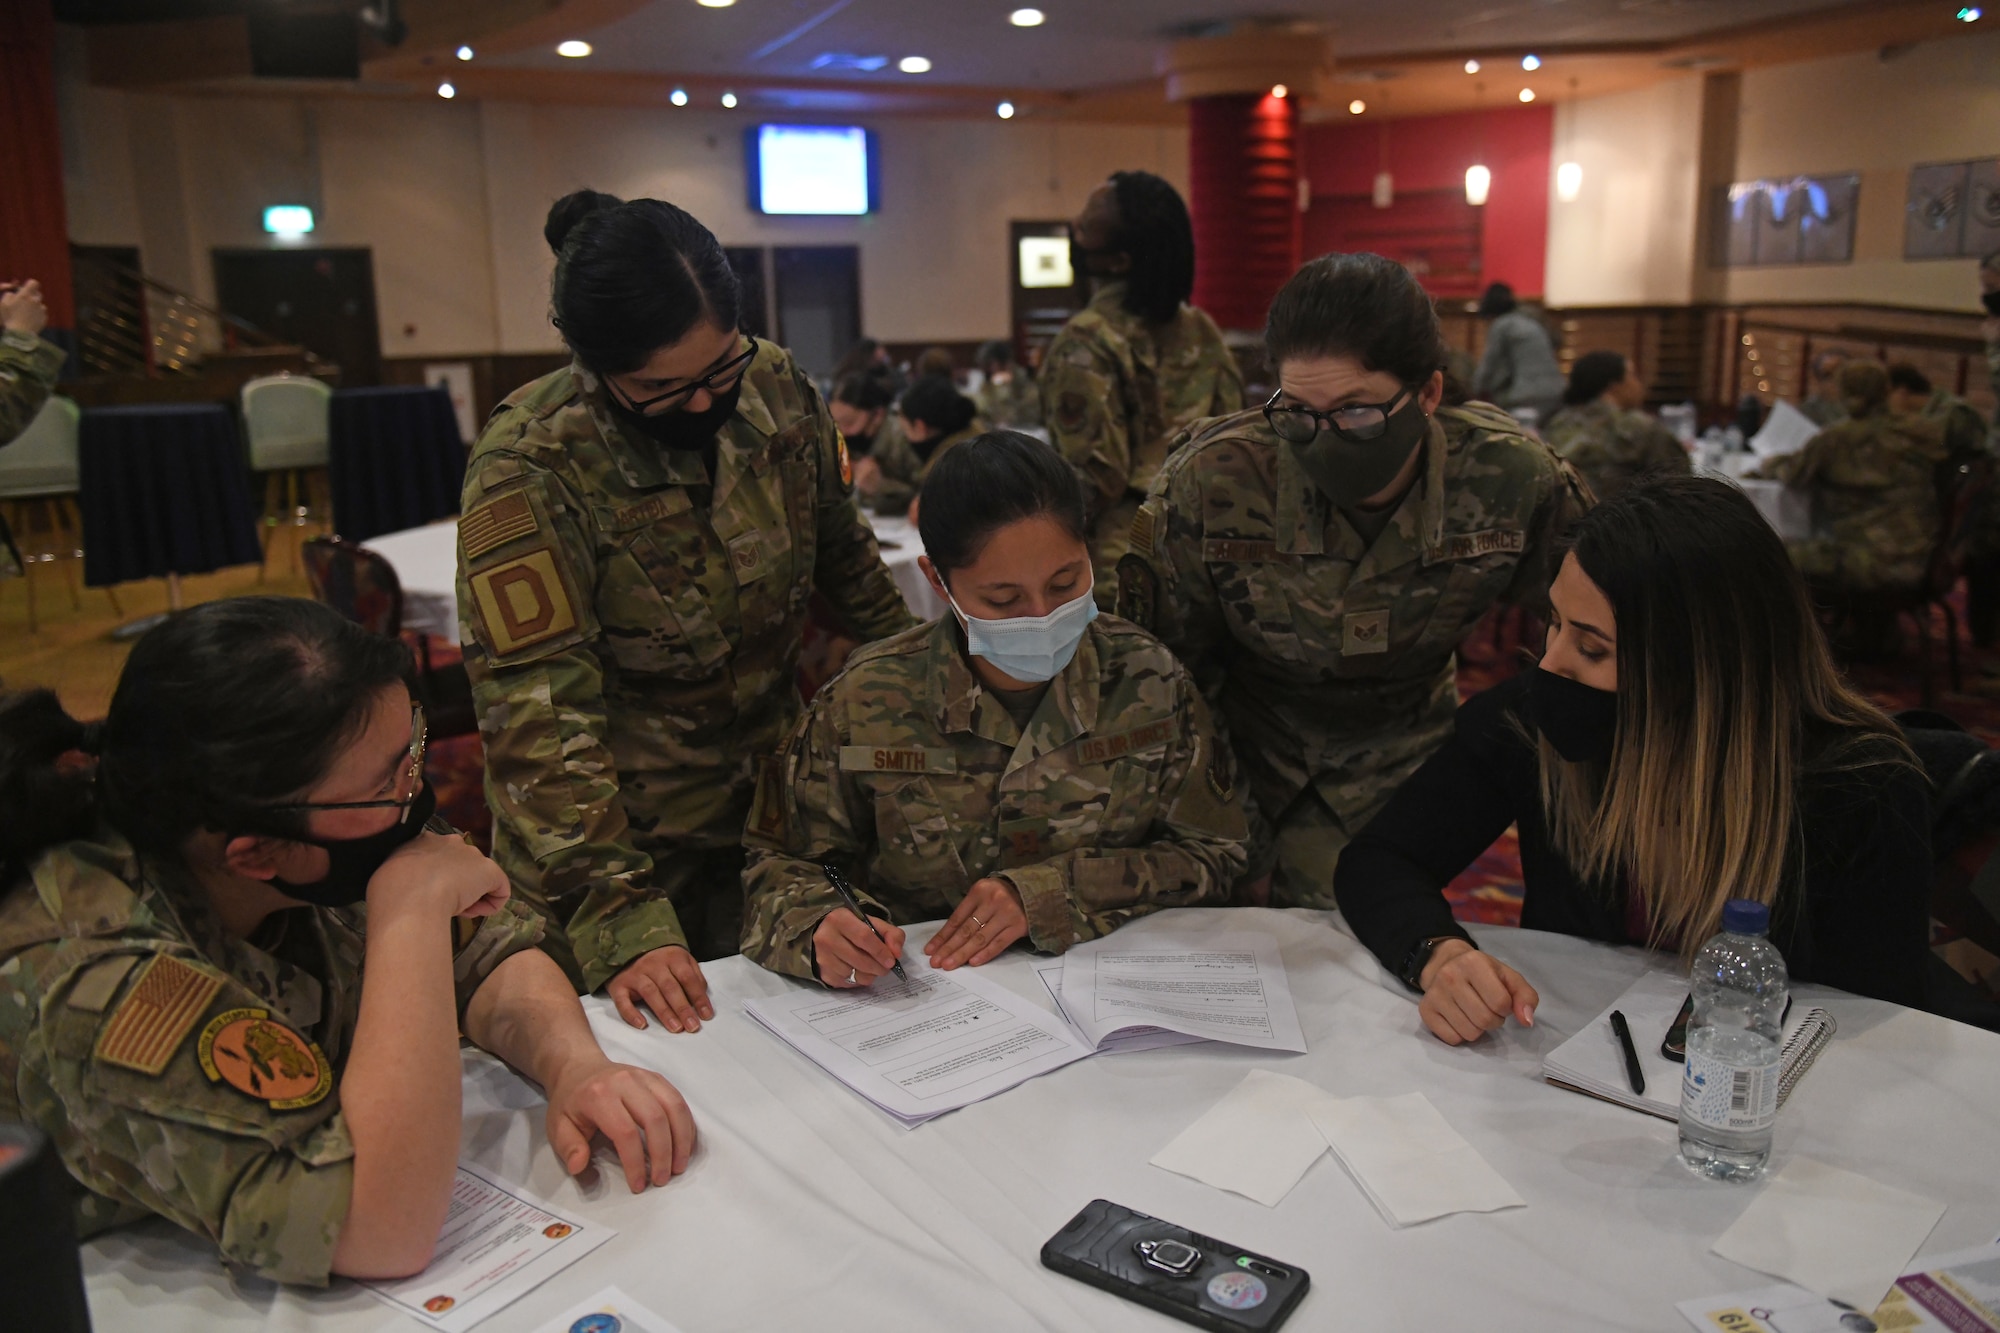 Tri-Base Women’s Leadership Symposium attendees complete a historical trivia questionnaire during a team-building activity at Royal Air Force Mildenhall, England, March 24, 2021. The event aimed to provide women across the tri-base area the opportunity to network and empower one another through open discussion and leadership development. (U.S. Air Force photo by Staff Sgt. Mackenzie Mendez)